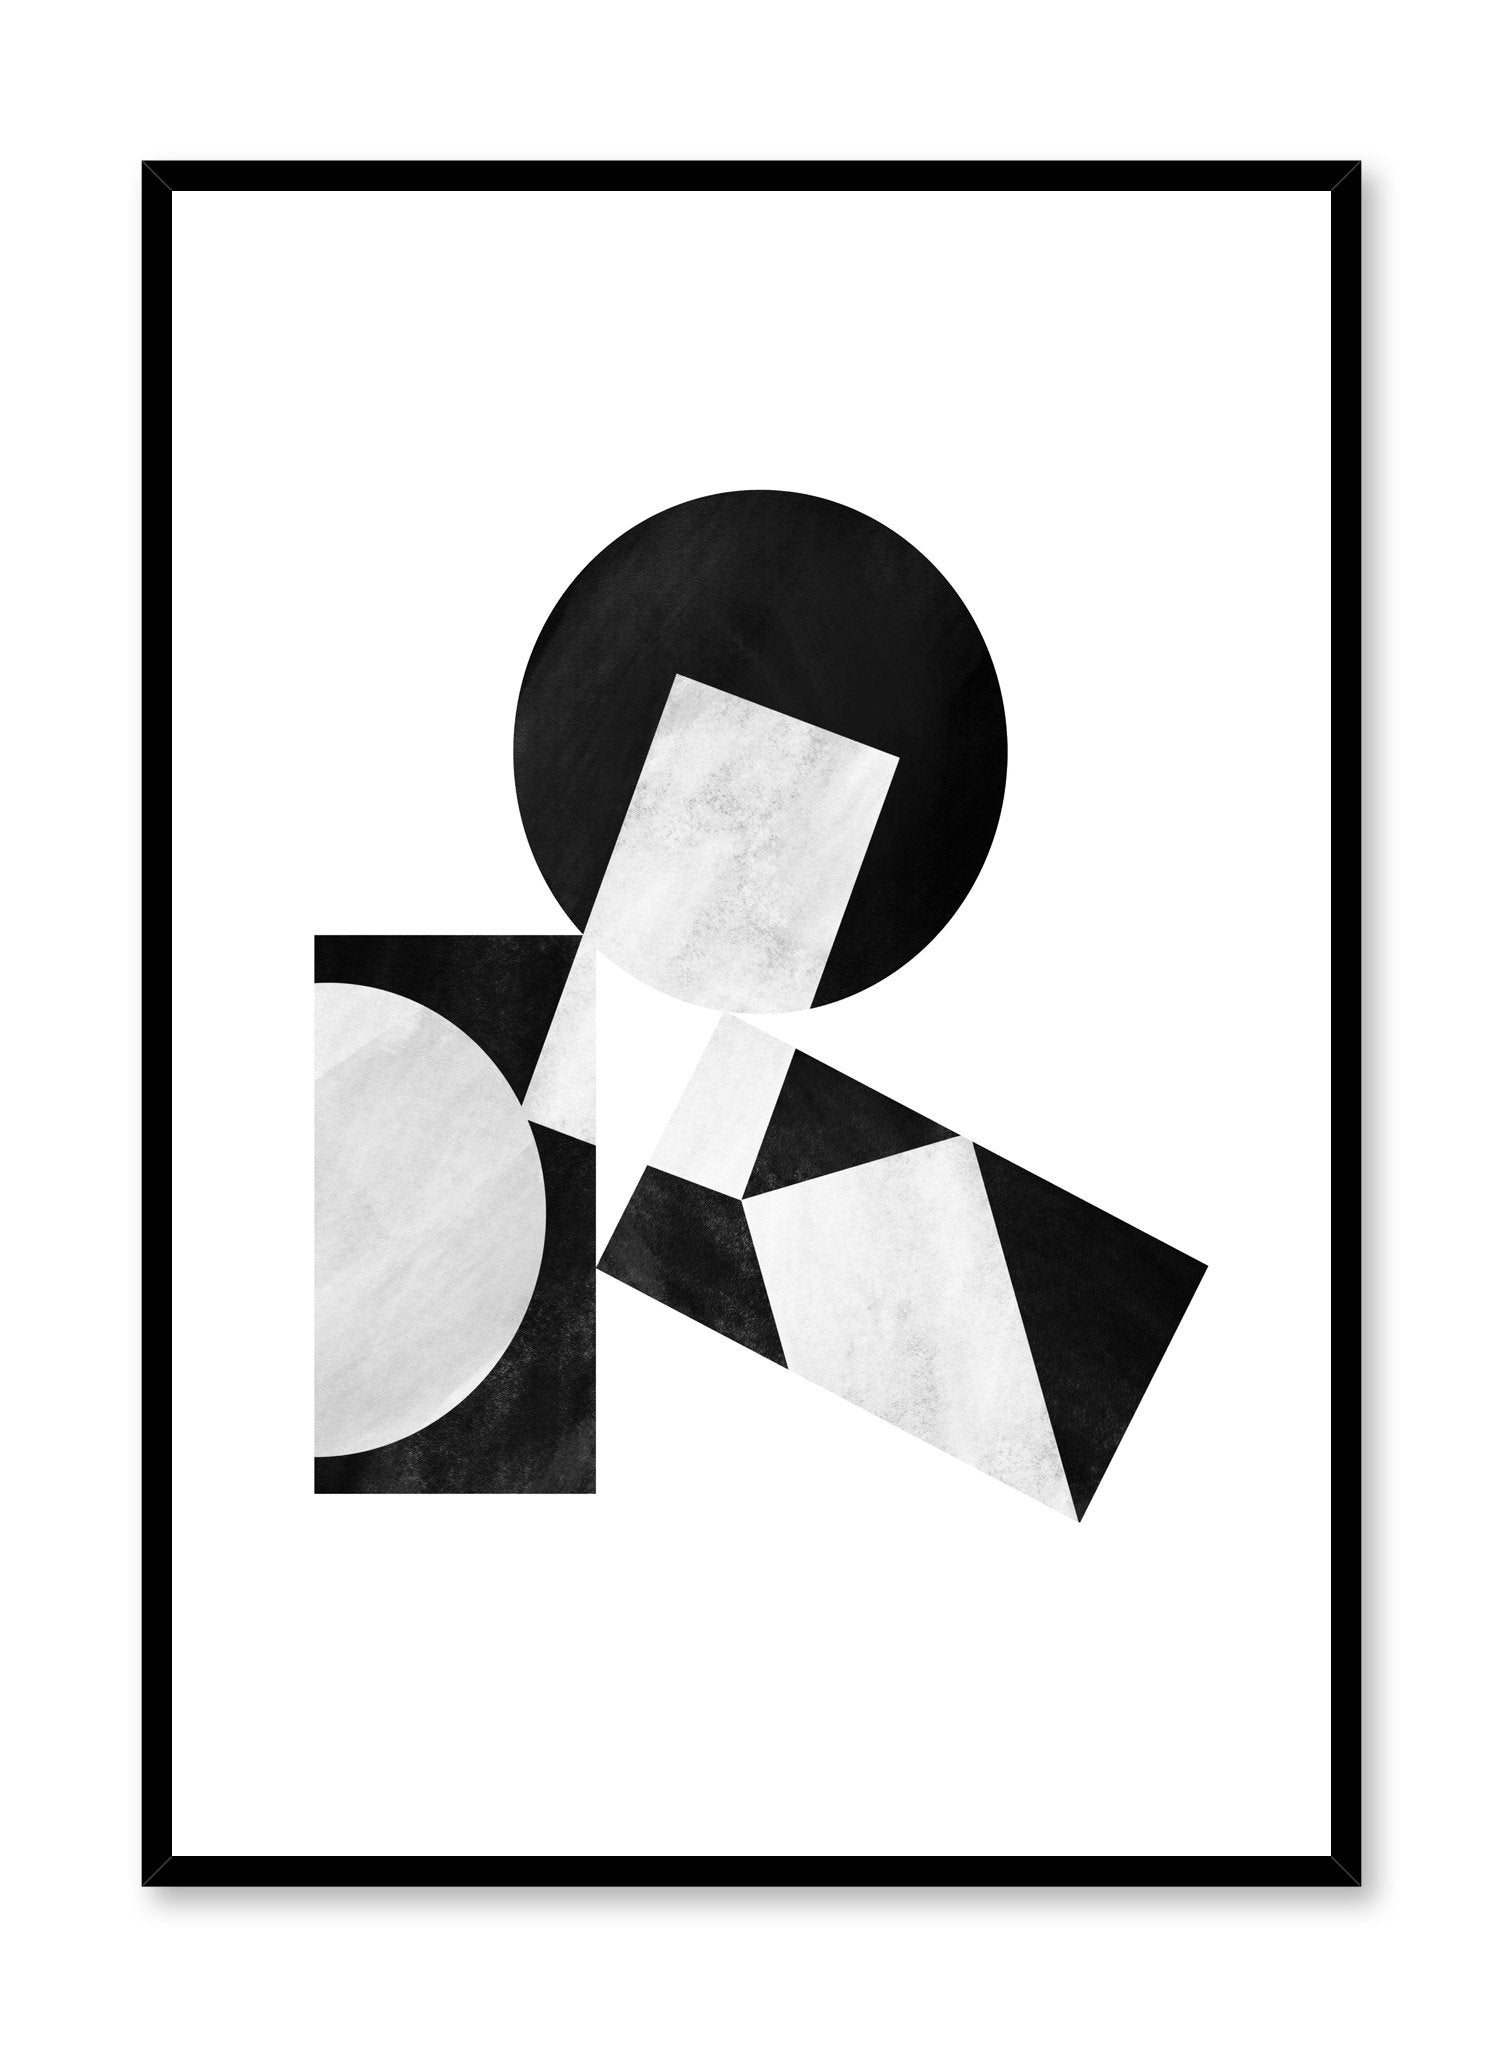 Modern minimalist abstract poster by Opposite Wall with black and white stacked shapes